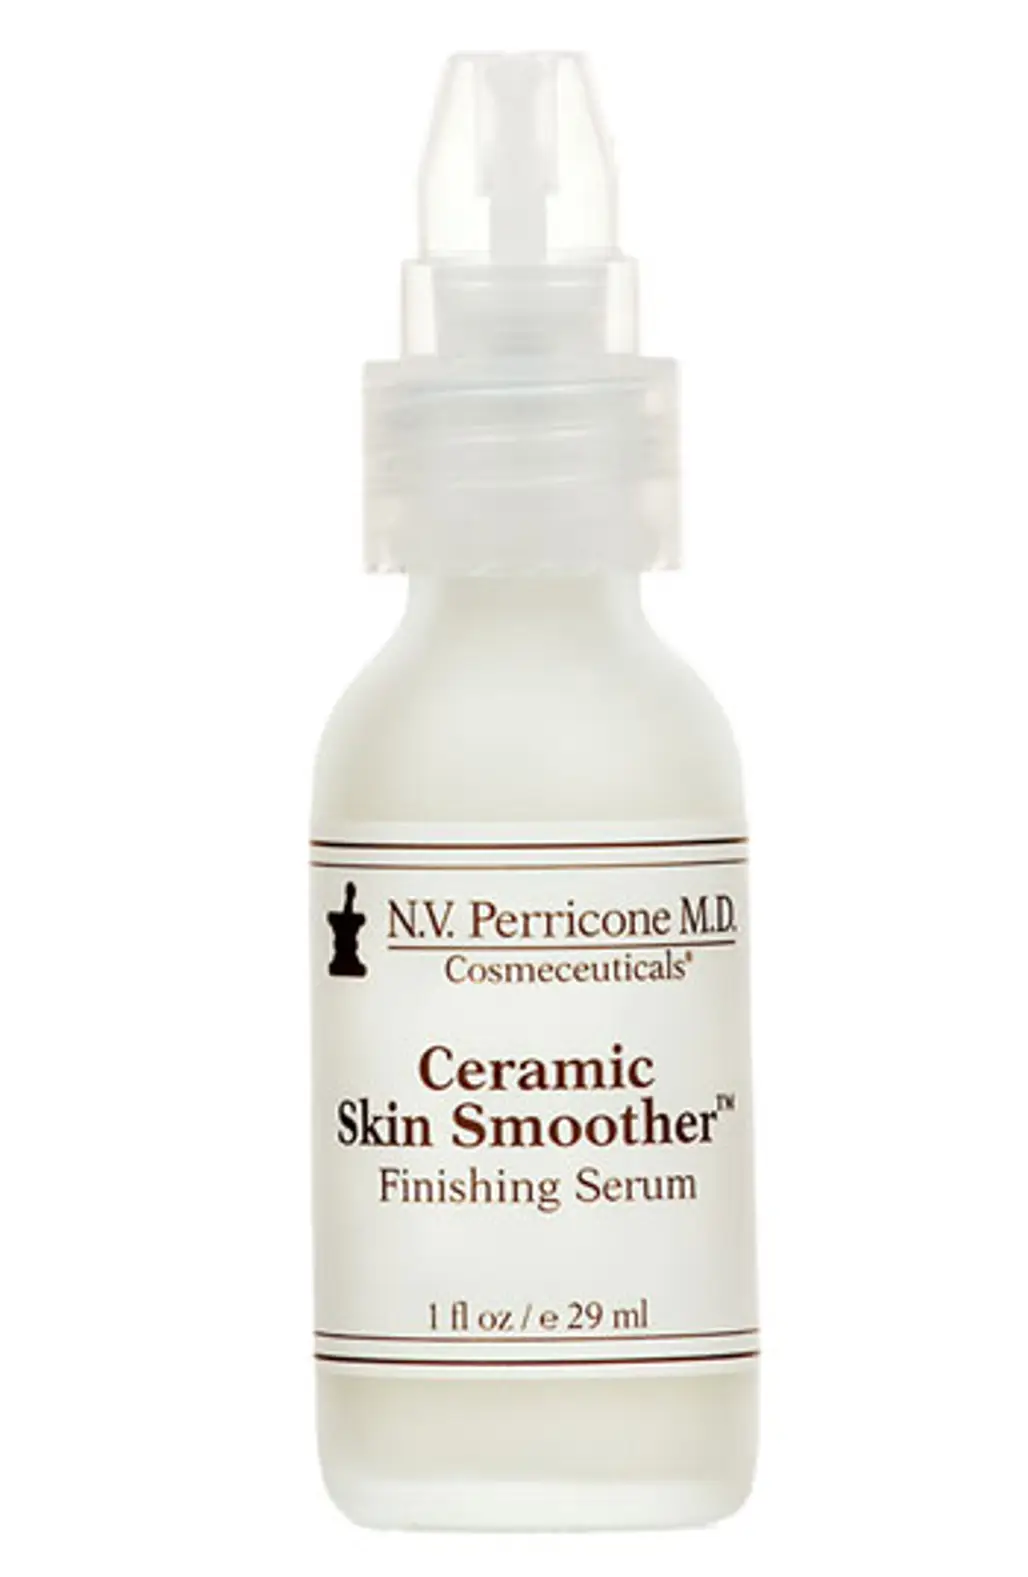 NV Perricone Ceramic Skin Smoother